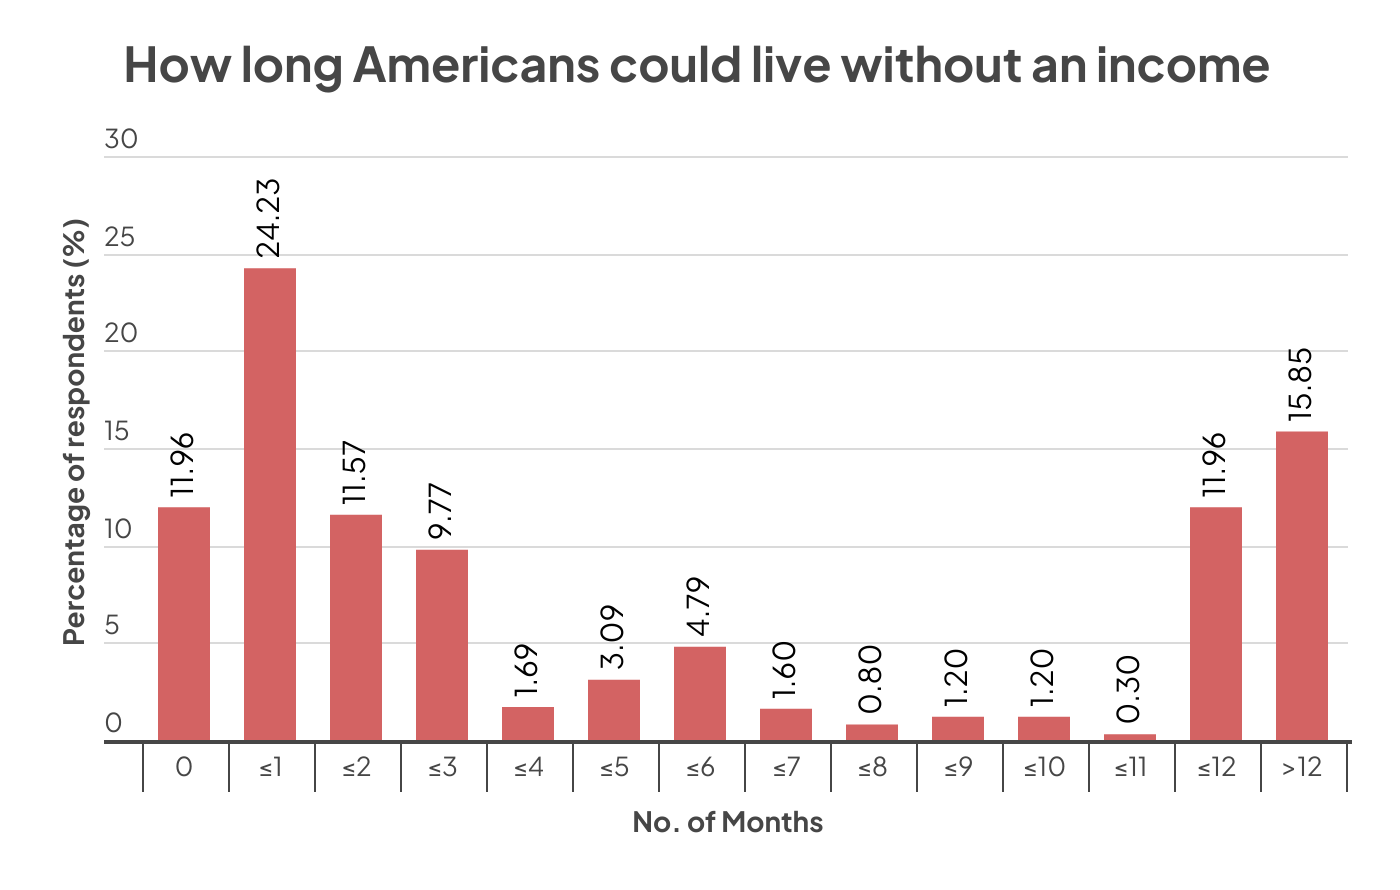 How long people could live without an income graph United States